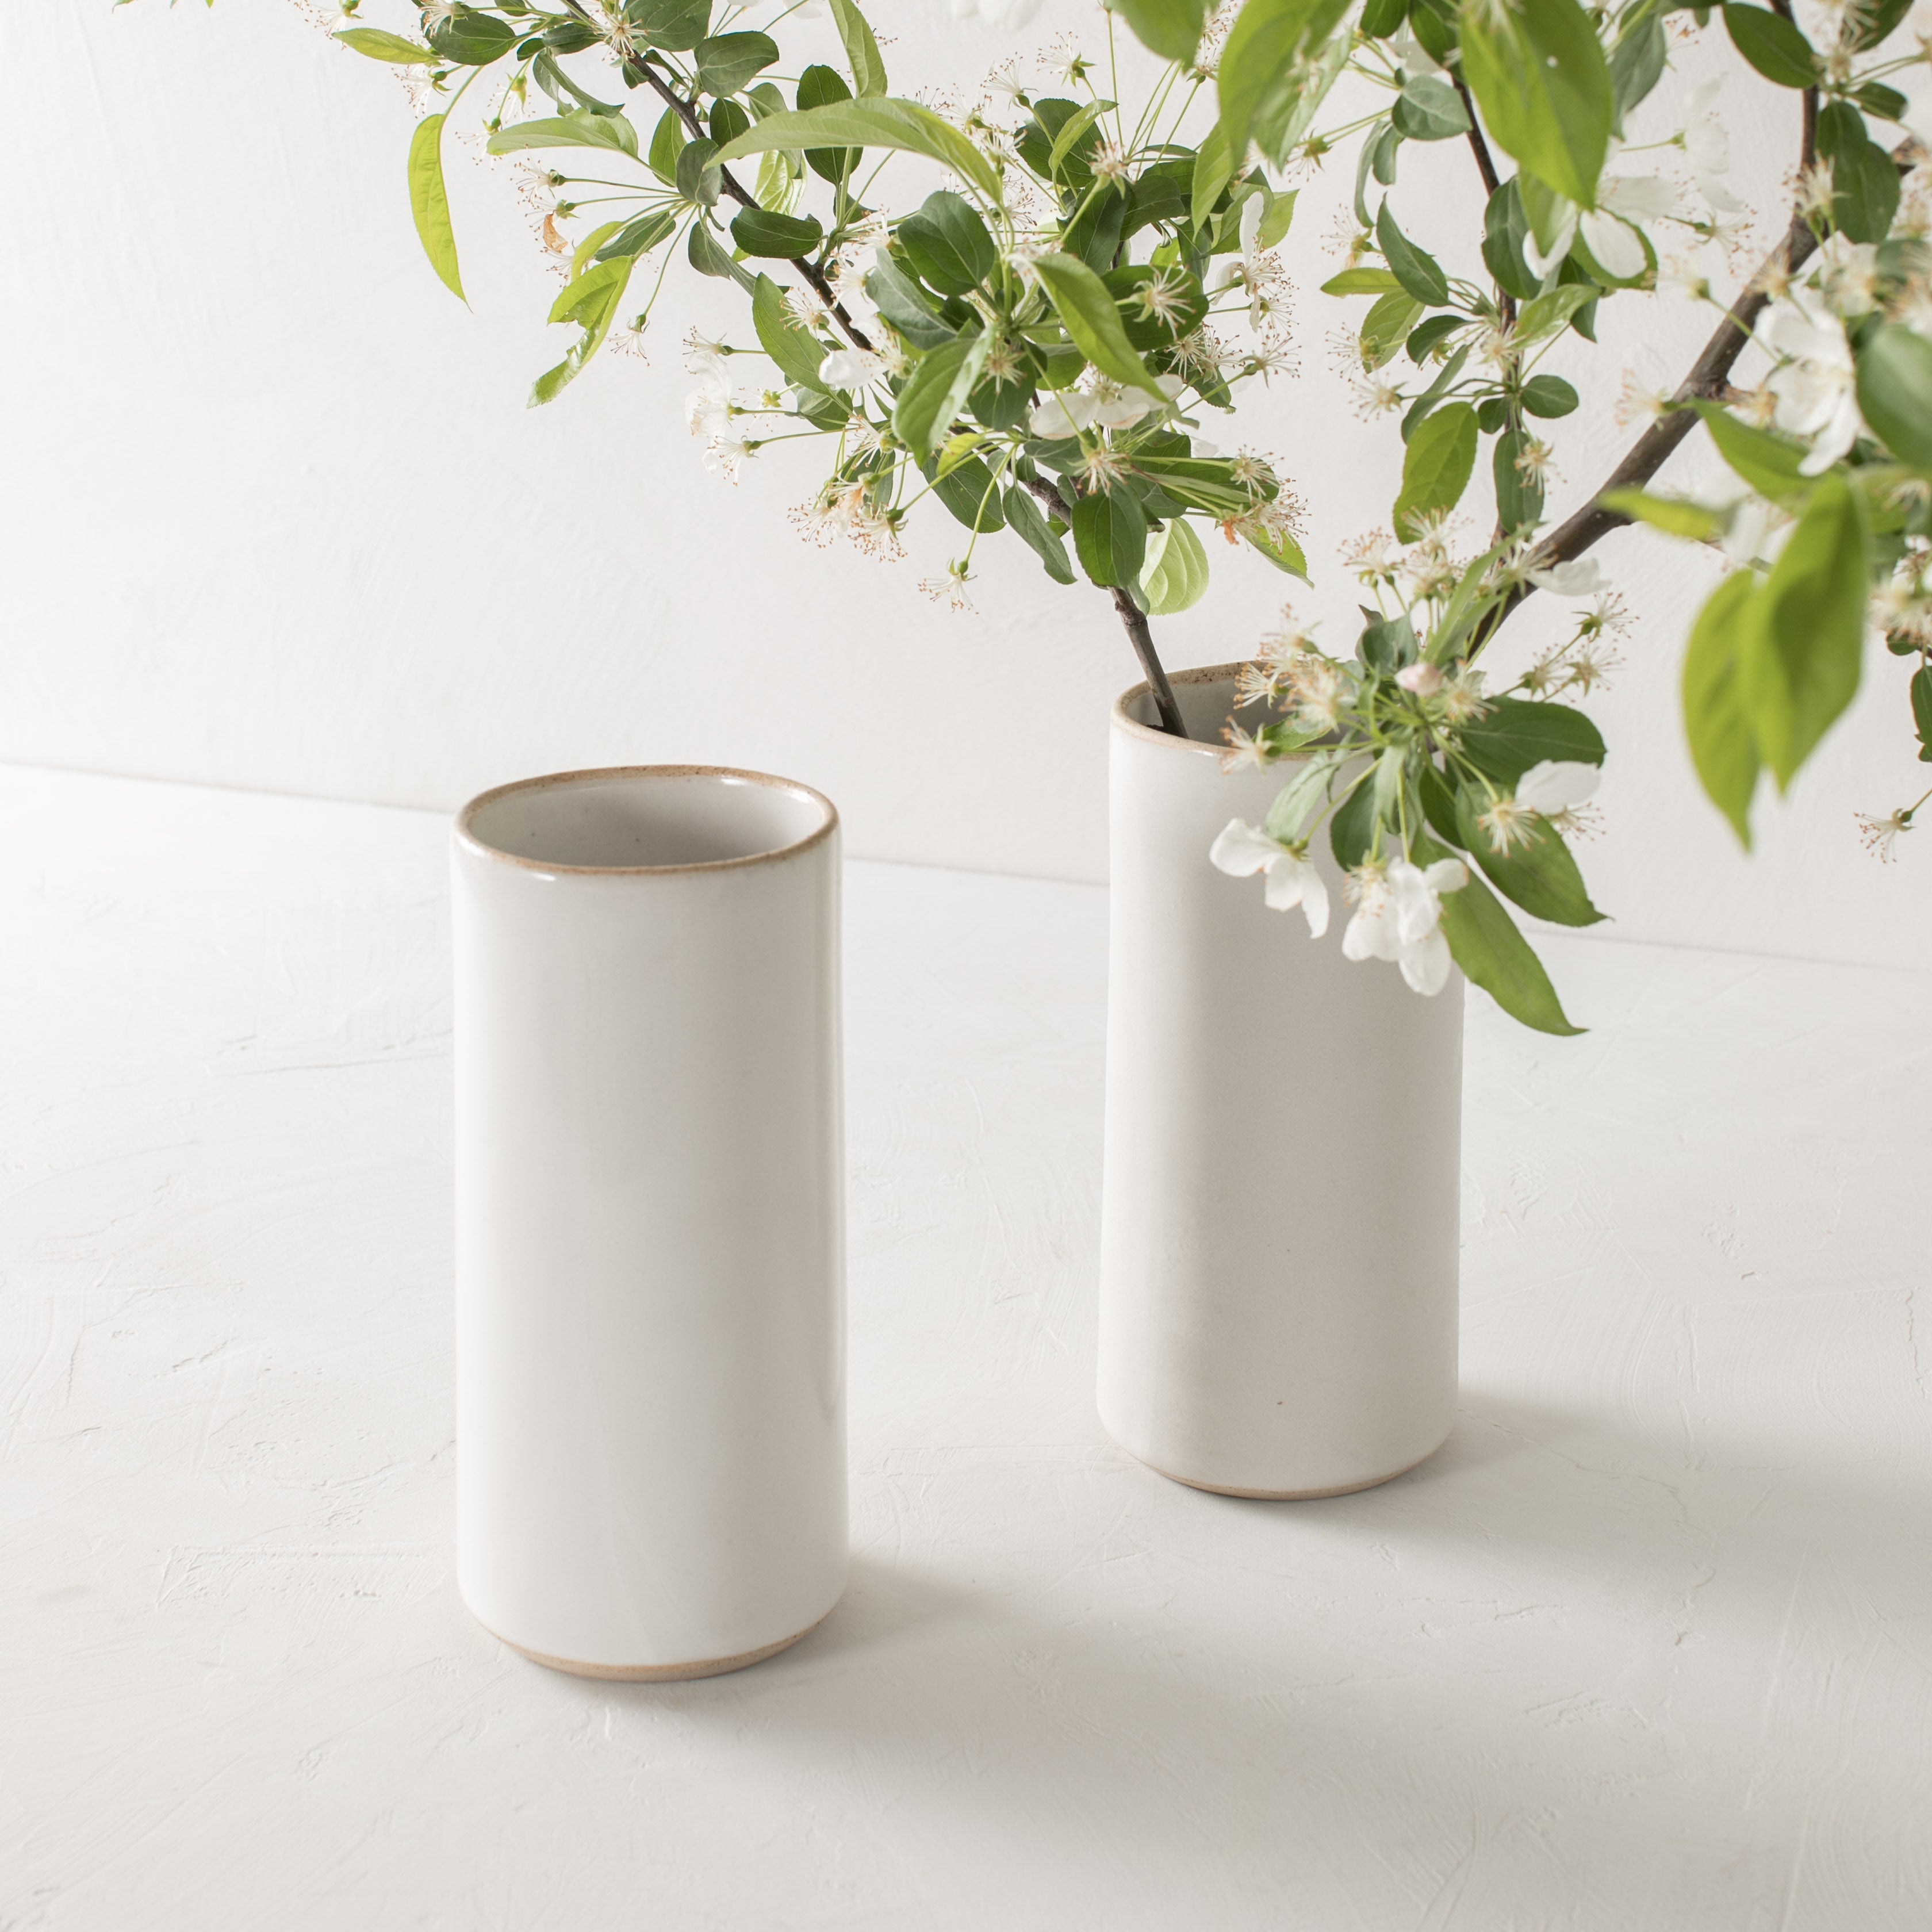 Two tall white glazed ceramic cylinder vases with an exposed stoneware rim and base. Detail up-close images focusing on vase holding a white blossom tree branch. Staged on a white textured plaster table and a white plaster textured wall. Designed and sold by Convivial Production, Kansas City Ceramics.